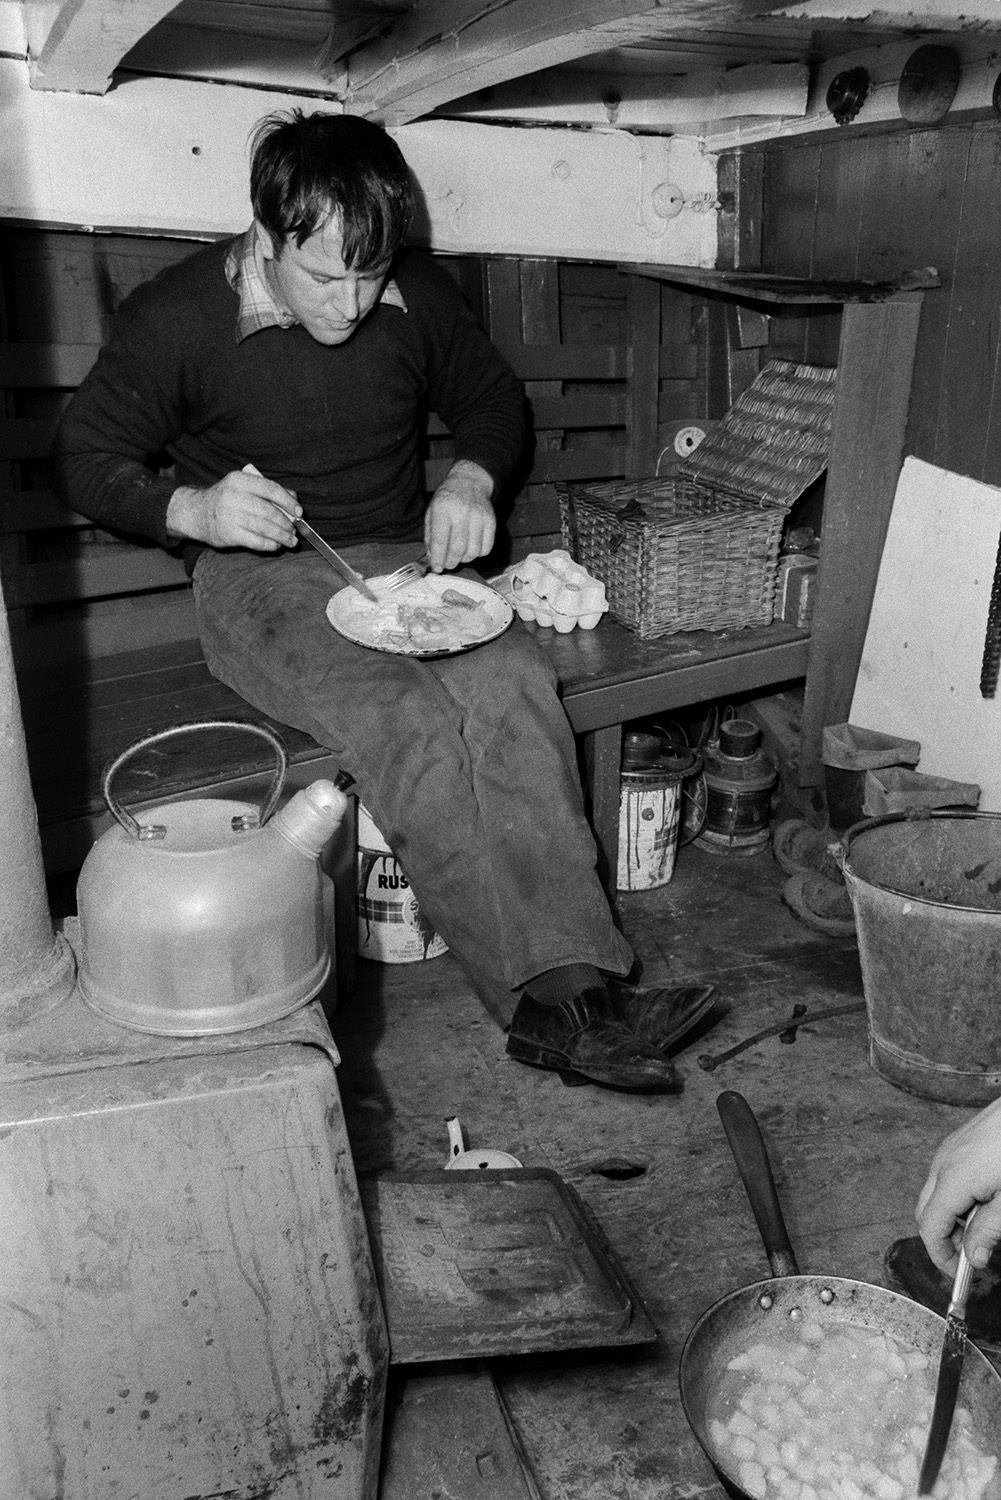 A man, possibly John Daniel, eating a fried breakfast inside a sand barge at Crow Point, Braunton, after loading the barge with sand from the beach. A basket, egg box, kettle and frying pan can be seen in the barge.